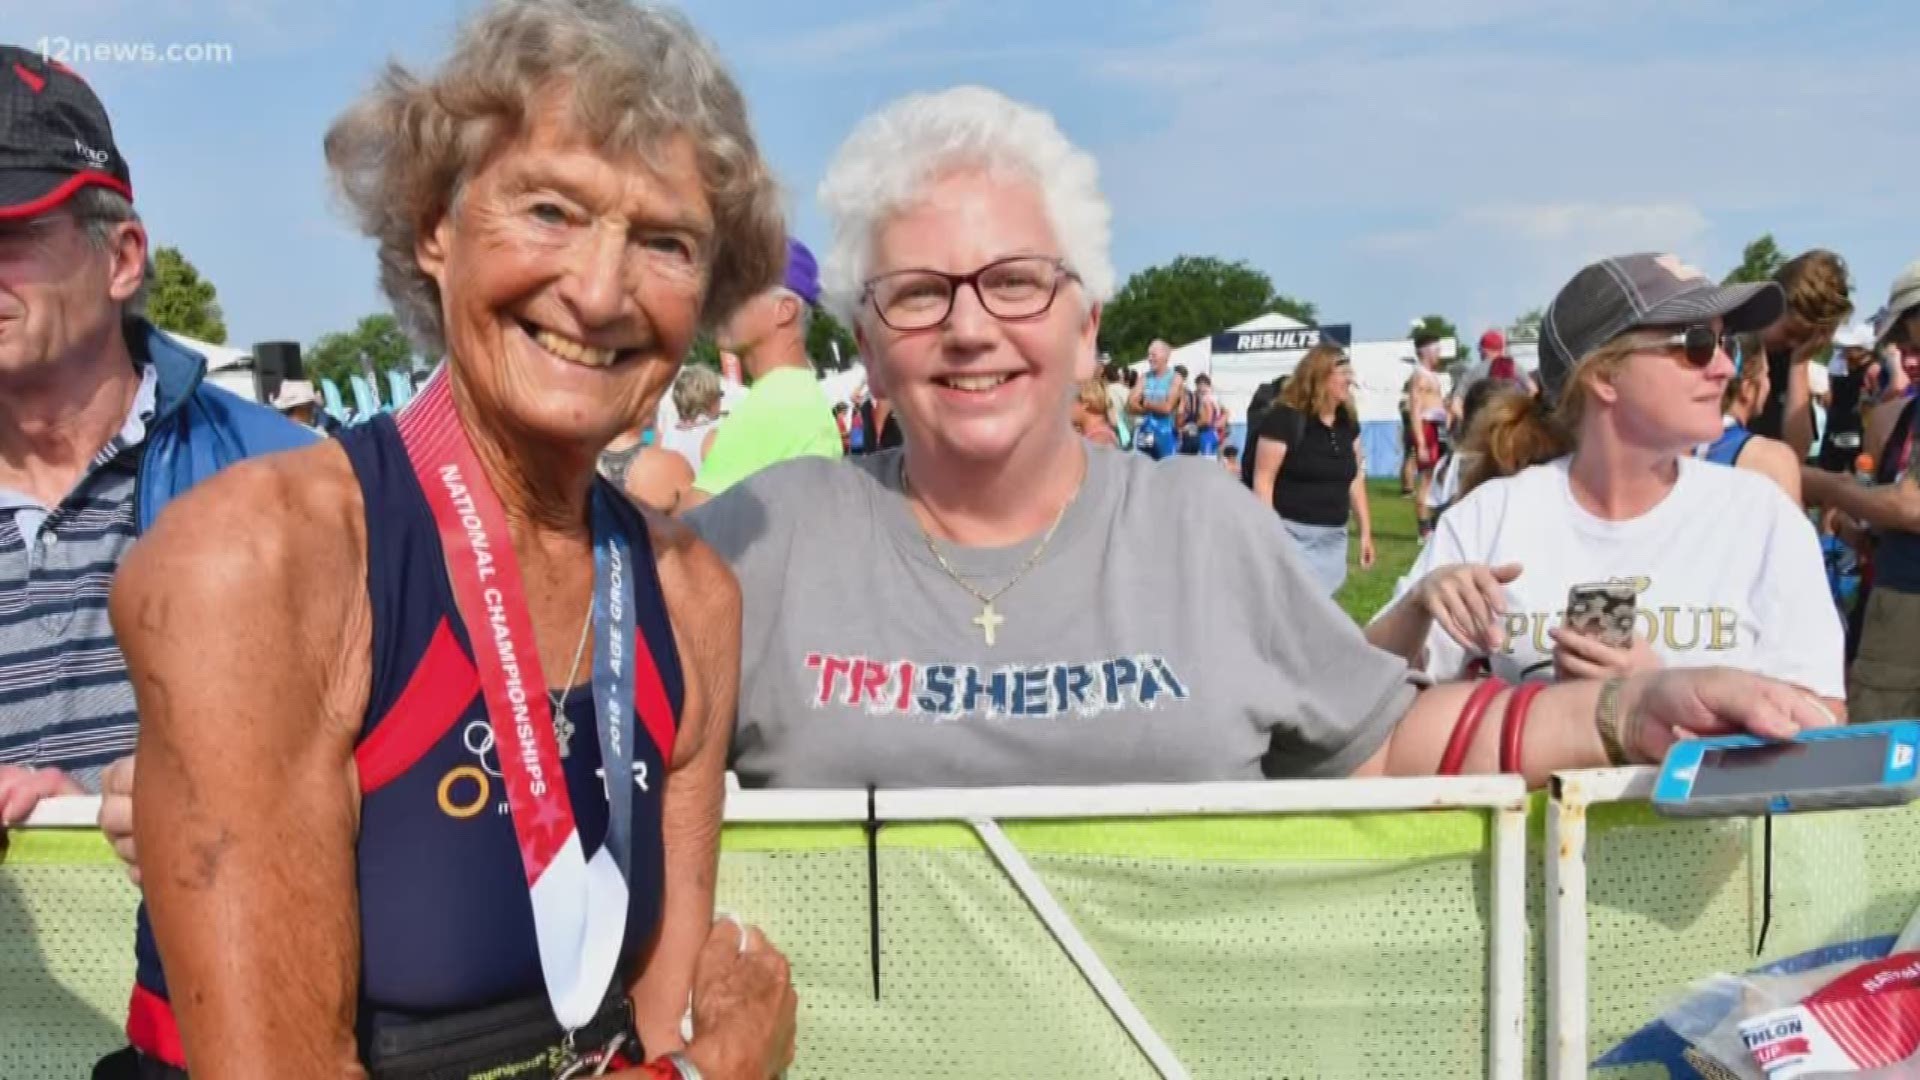 Sister Madonna Buder is an 89-year-old who has completed her 390th triathlon, and she just so happens to be a nun. The sister has been running since 1978 when she was just 48 years old.